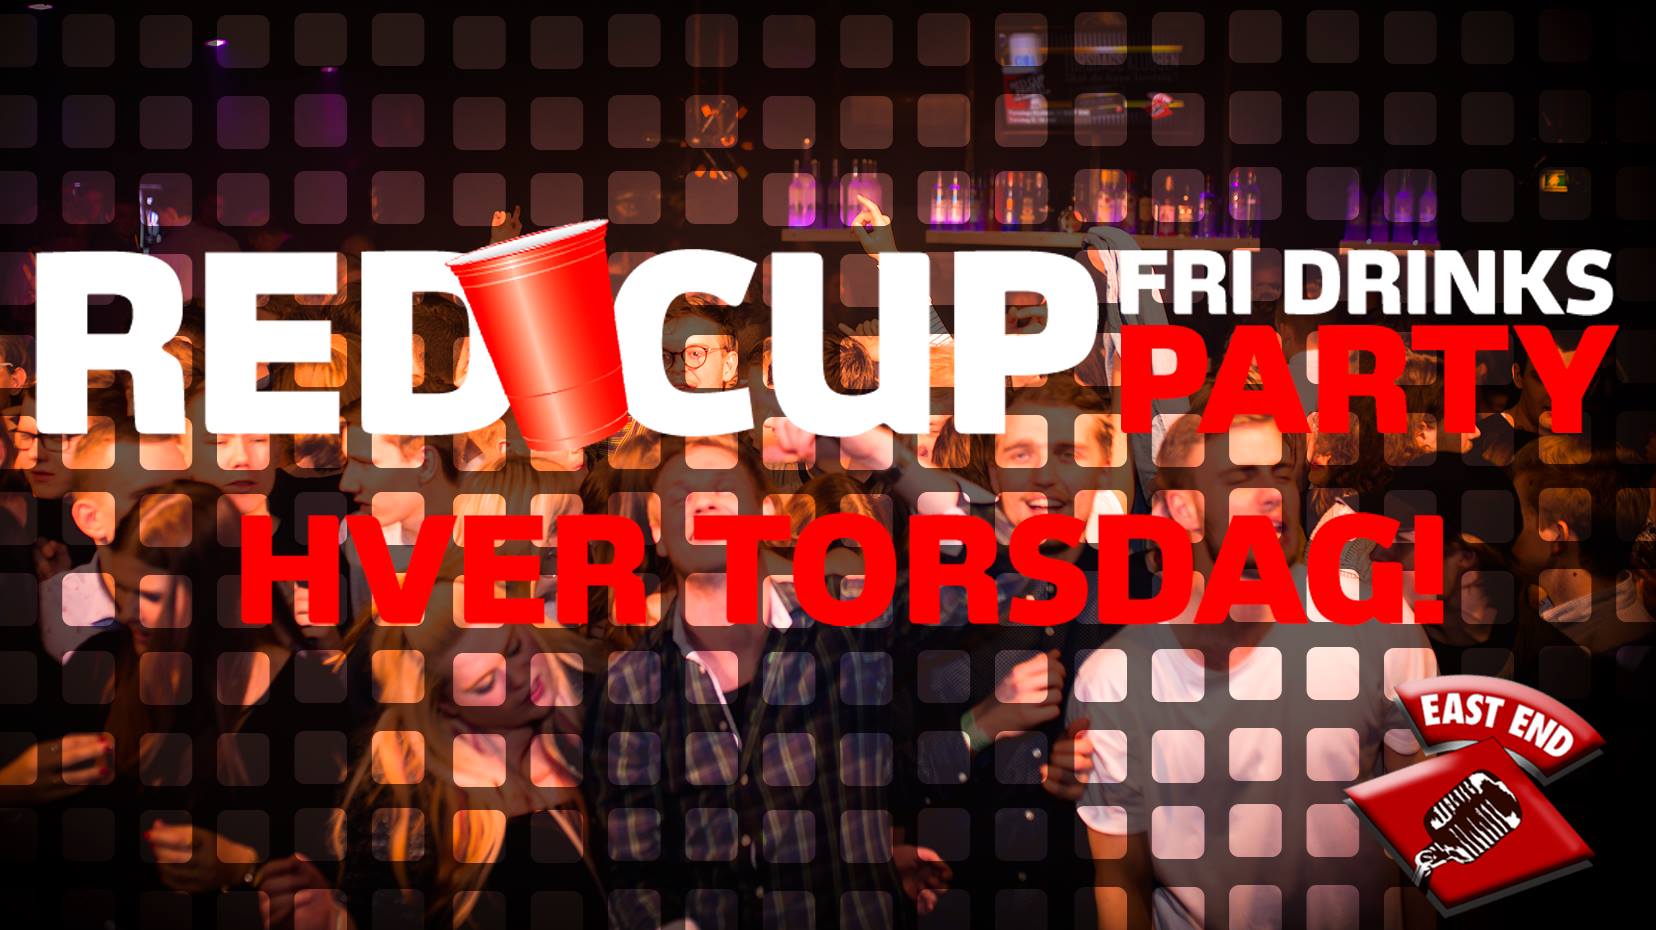 RED CUP PARTY (fri drinks) ◆ EAST END